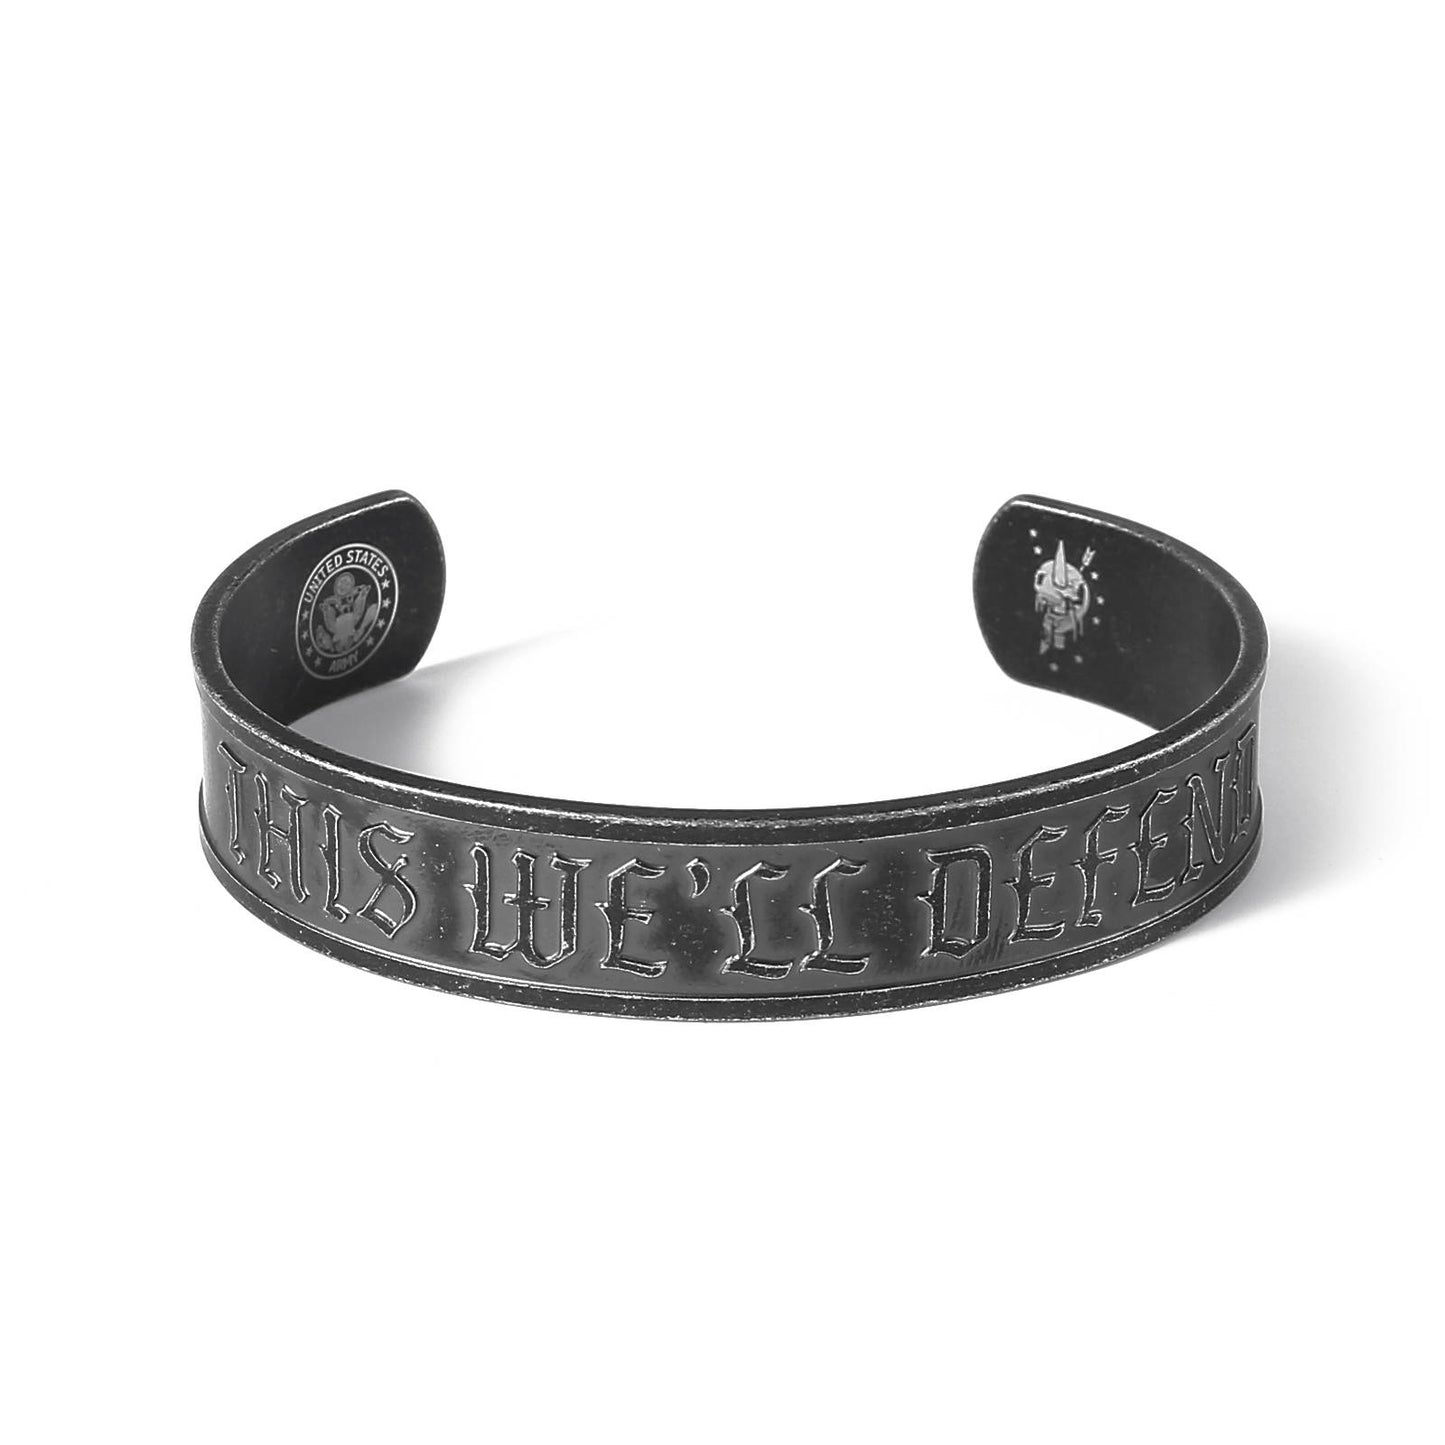 This We'll Defend - Stainless Steel Cuff Braclet